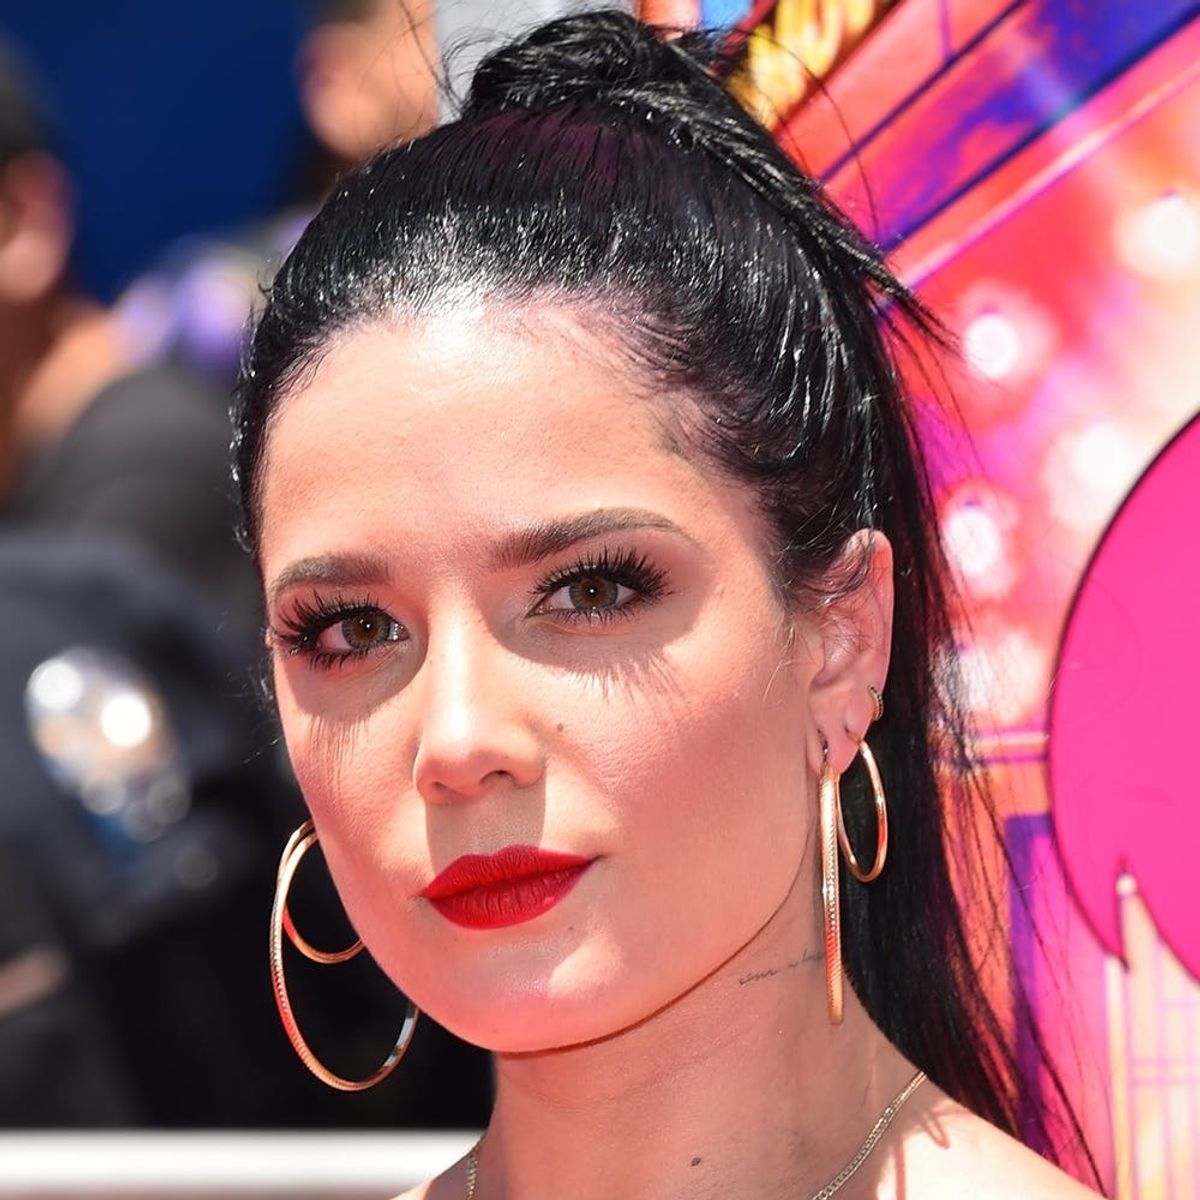 Halsey Ditches the Wigs to Show Off Her Natural Hair